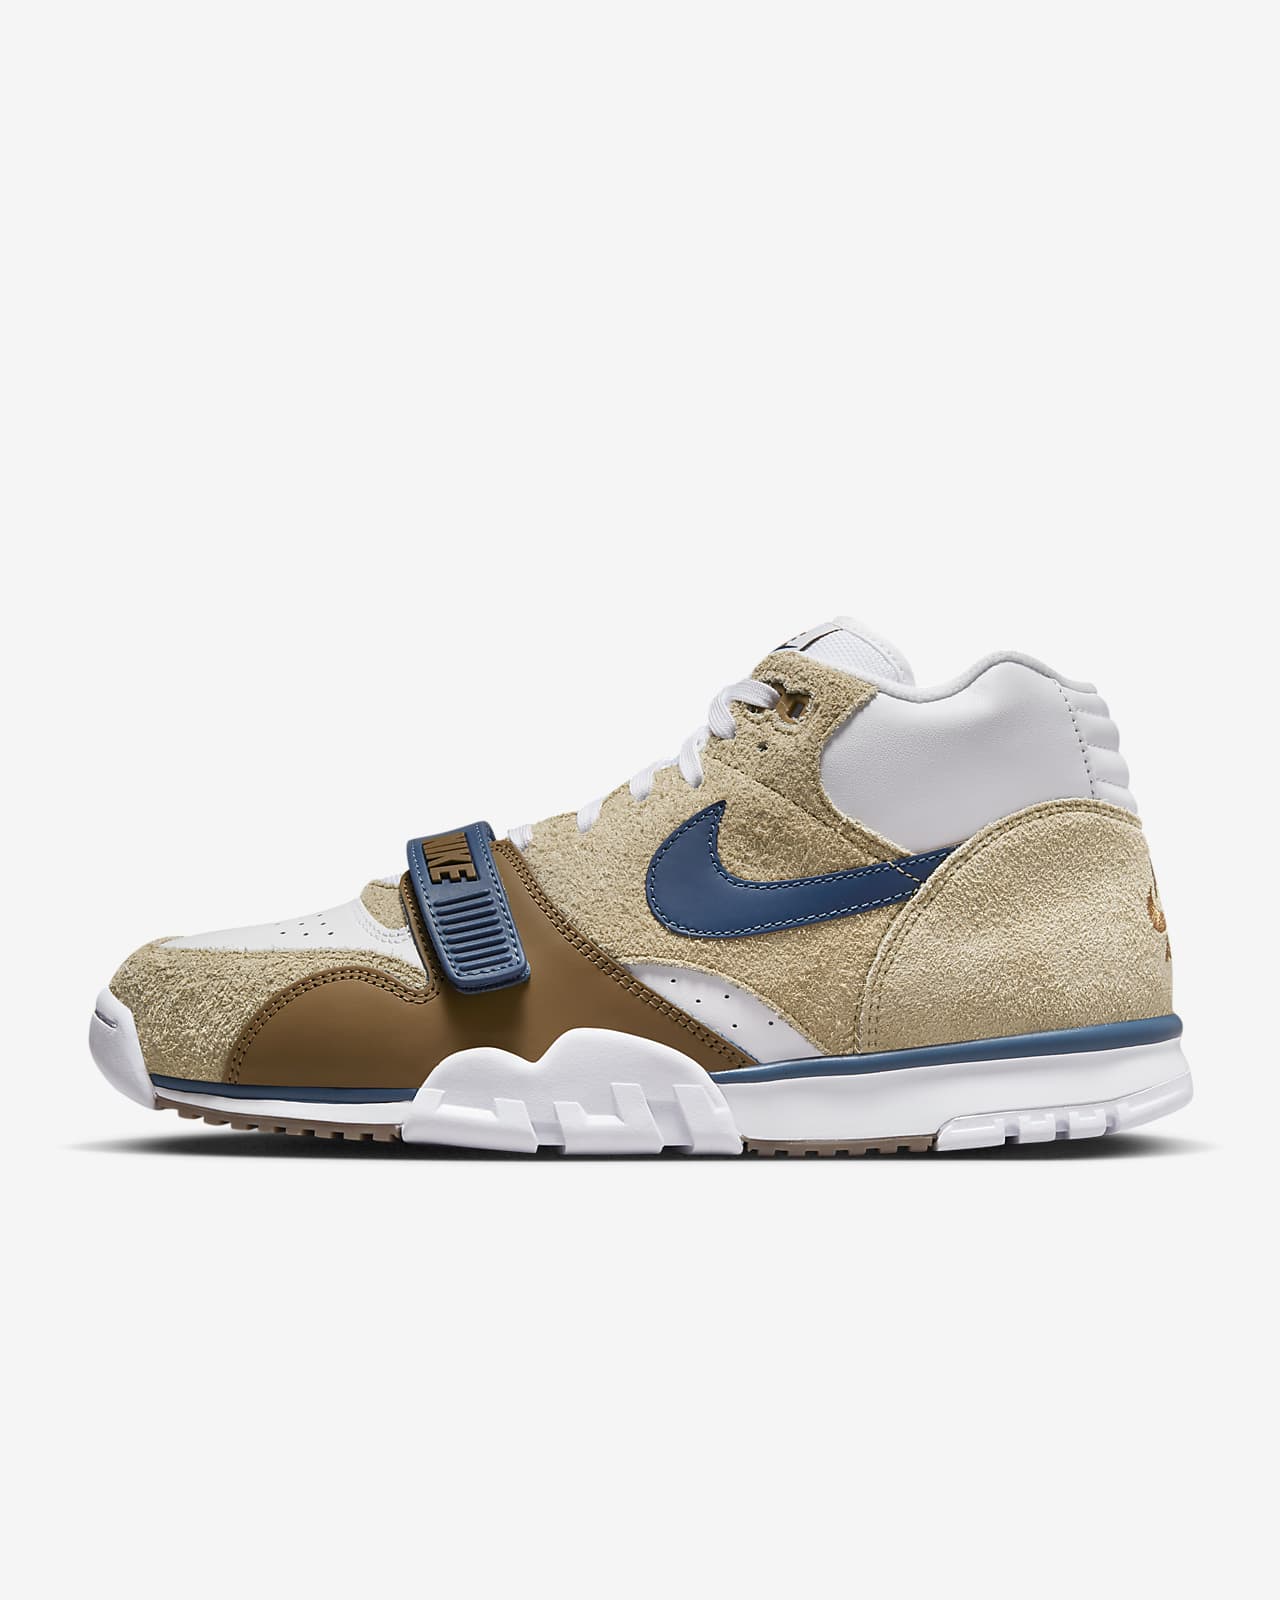 Nike Air Trainer Shoes. Nike IL